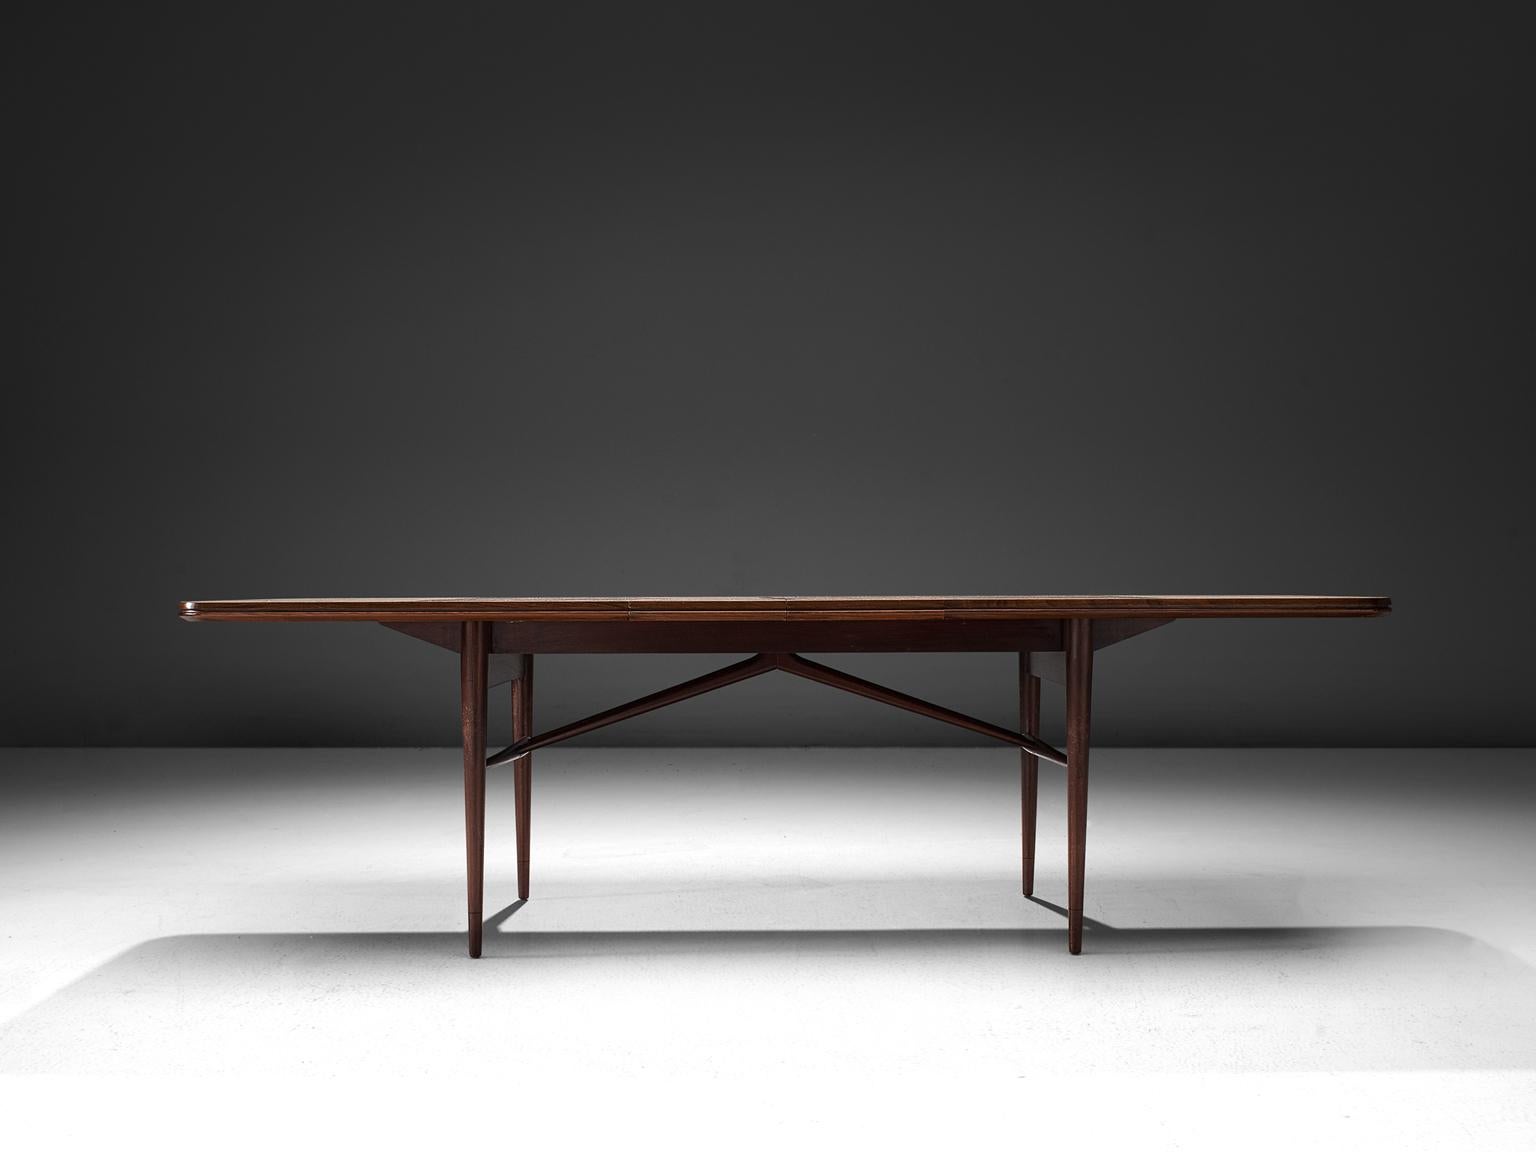 Robert Heritage for Archie Shine, dining table, teak, mahogany, England, 1950s. 

This dining table is executed in teak and mahogany and features elegant details that turn this simplistic table in a wonderfully designed piece. The rods underneath